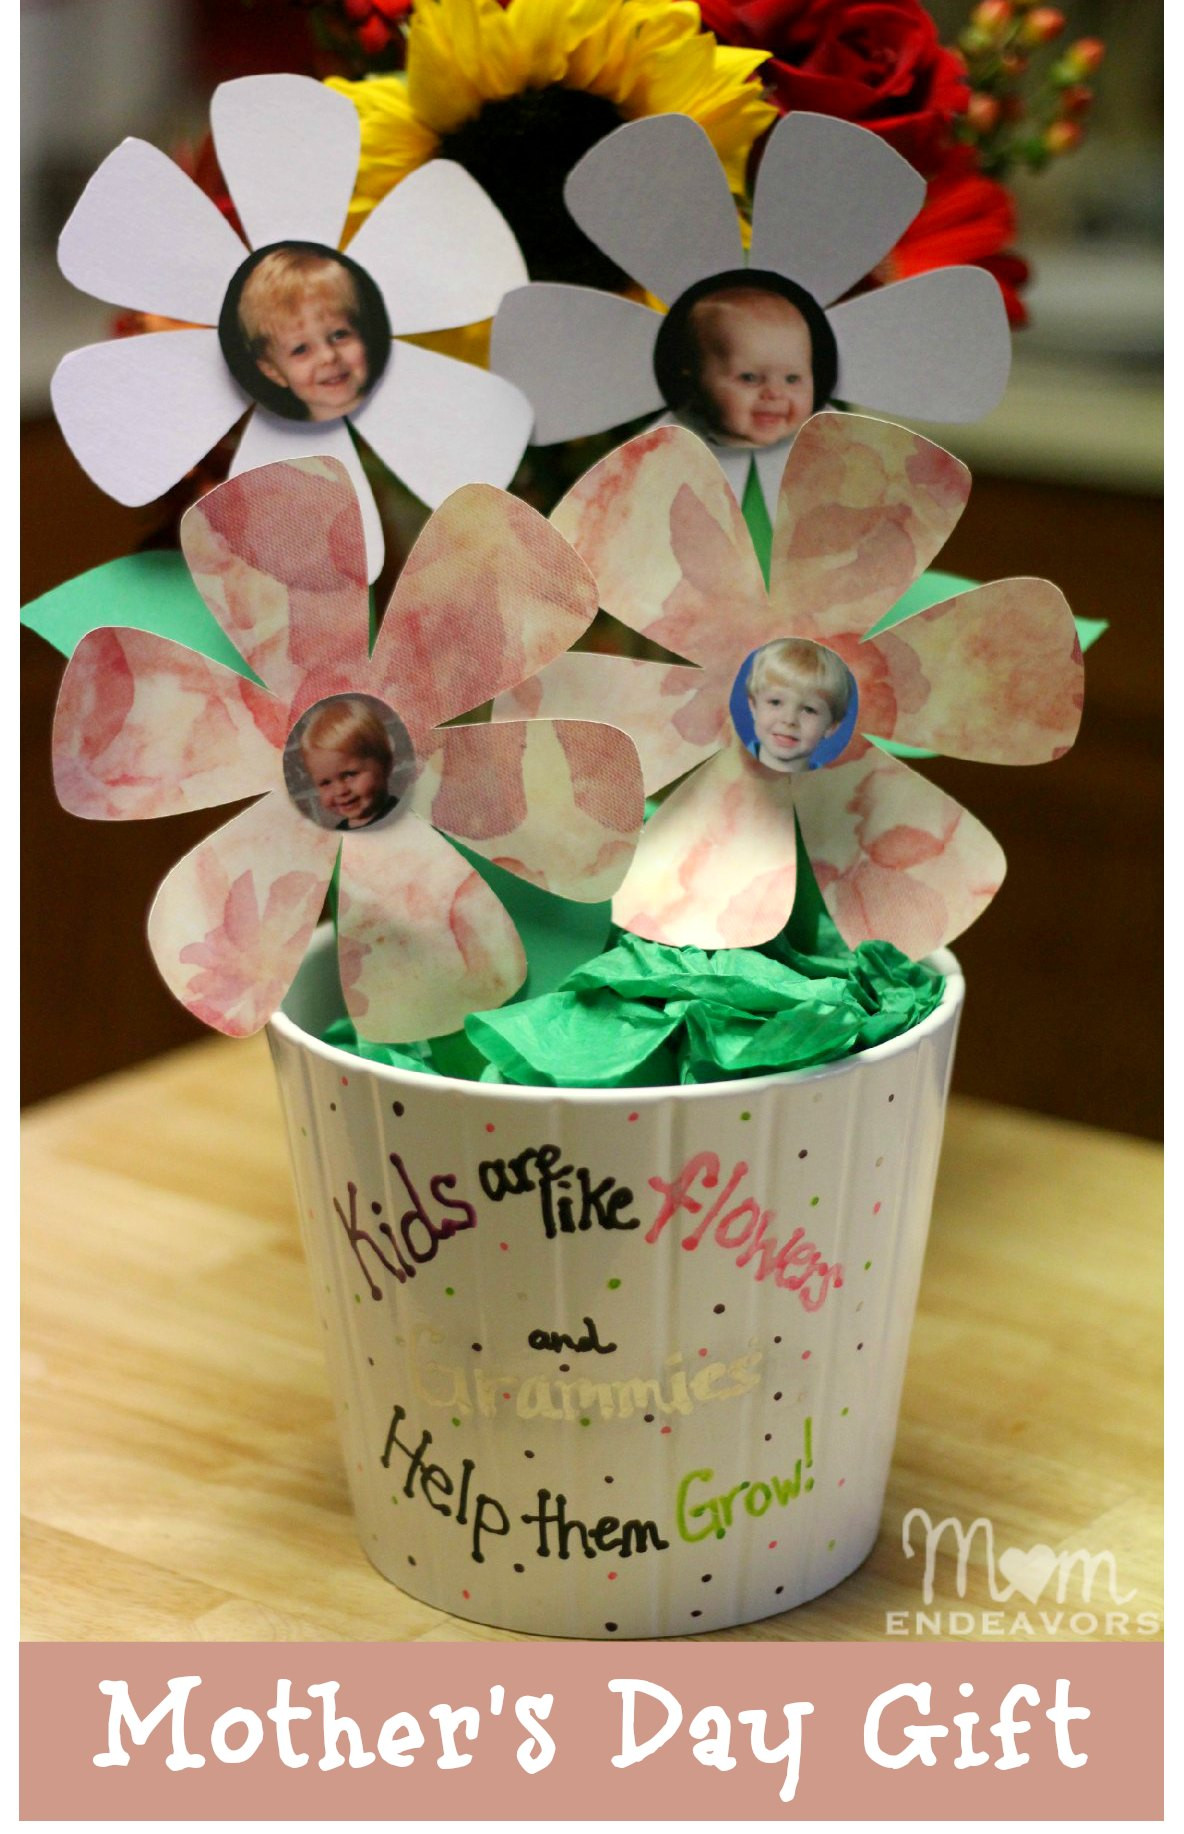 Mothers Day Handmade Gifts
 How to Choose a Meaningful Mother’s Day Gift